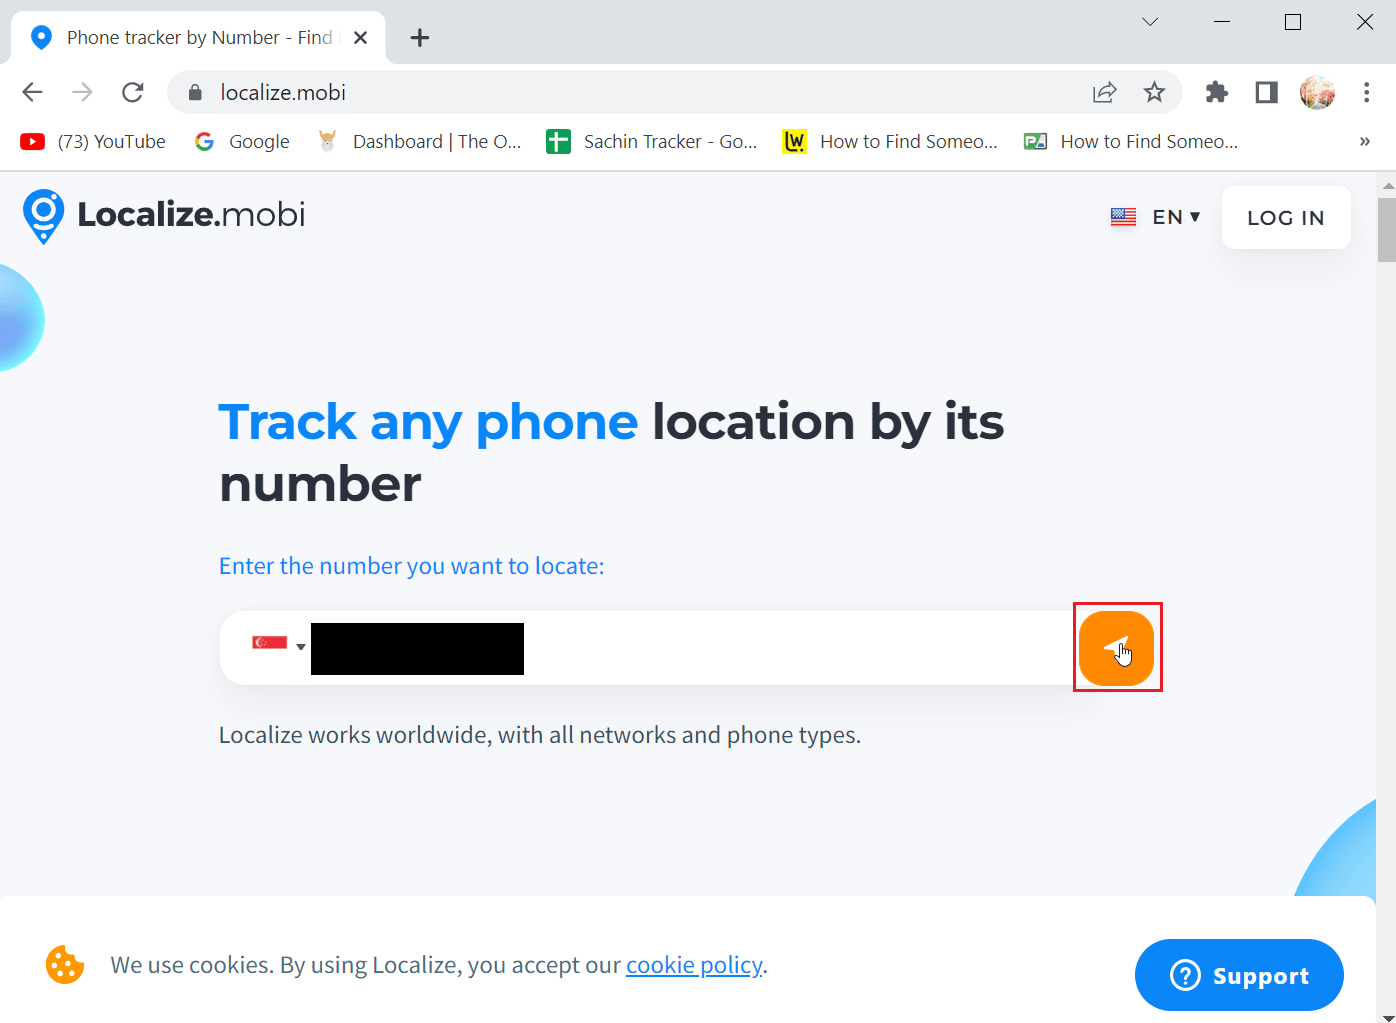 enter phone number and click on the arrow icon